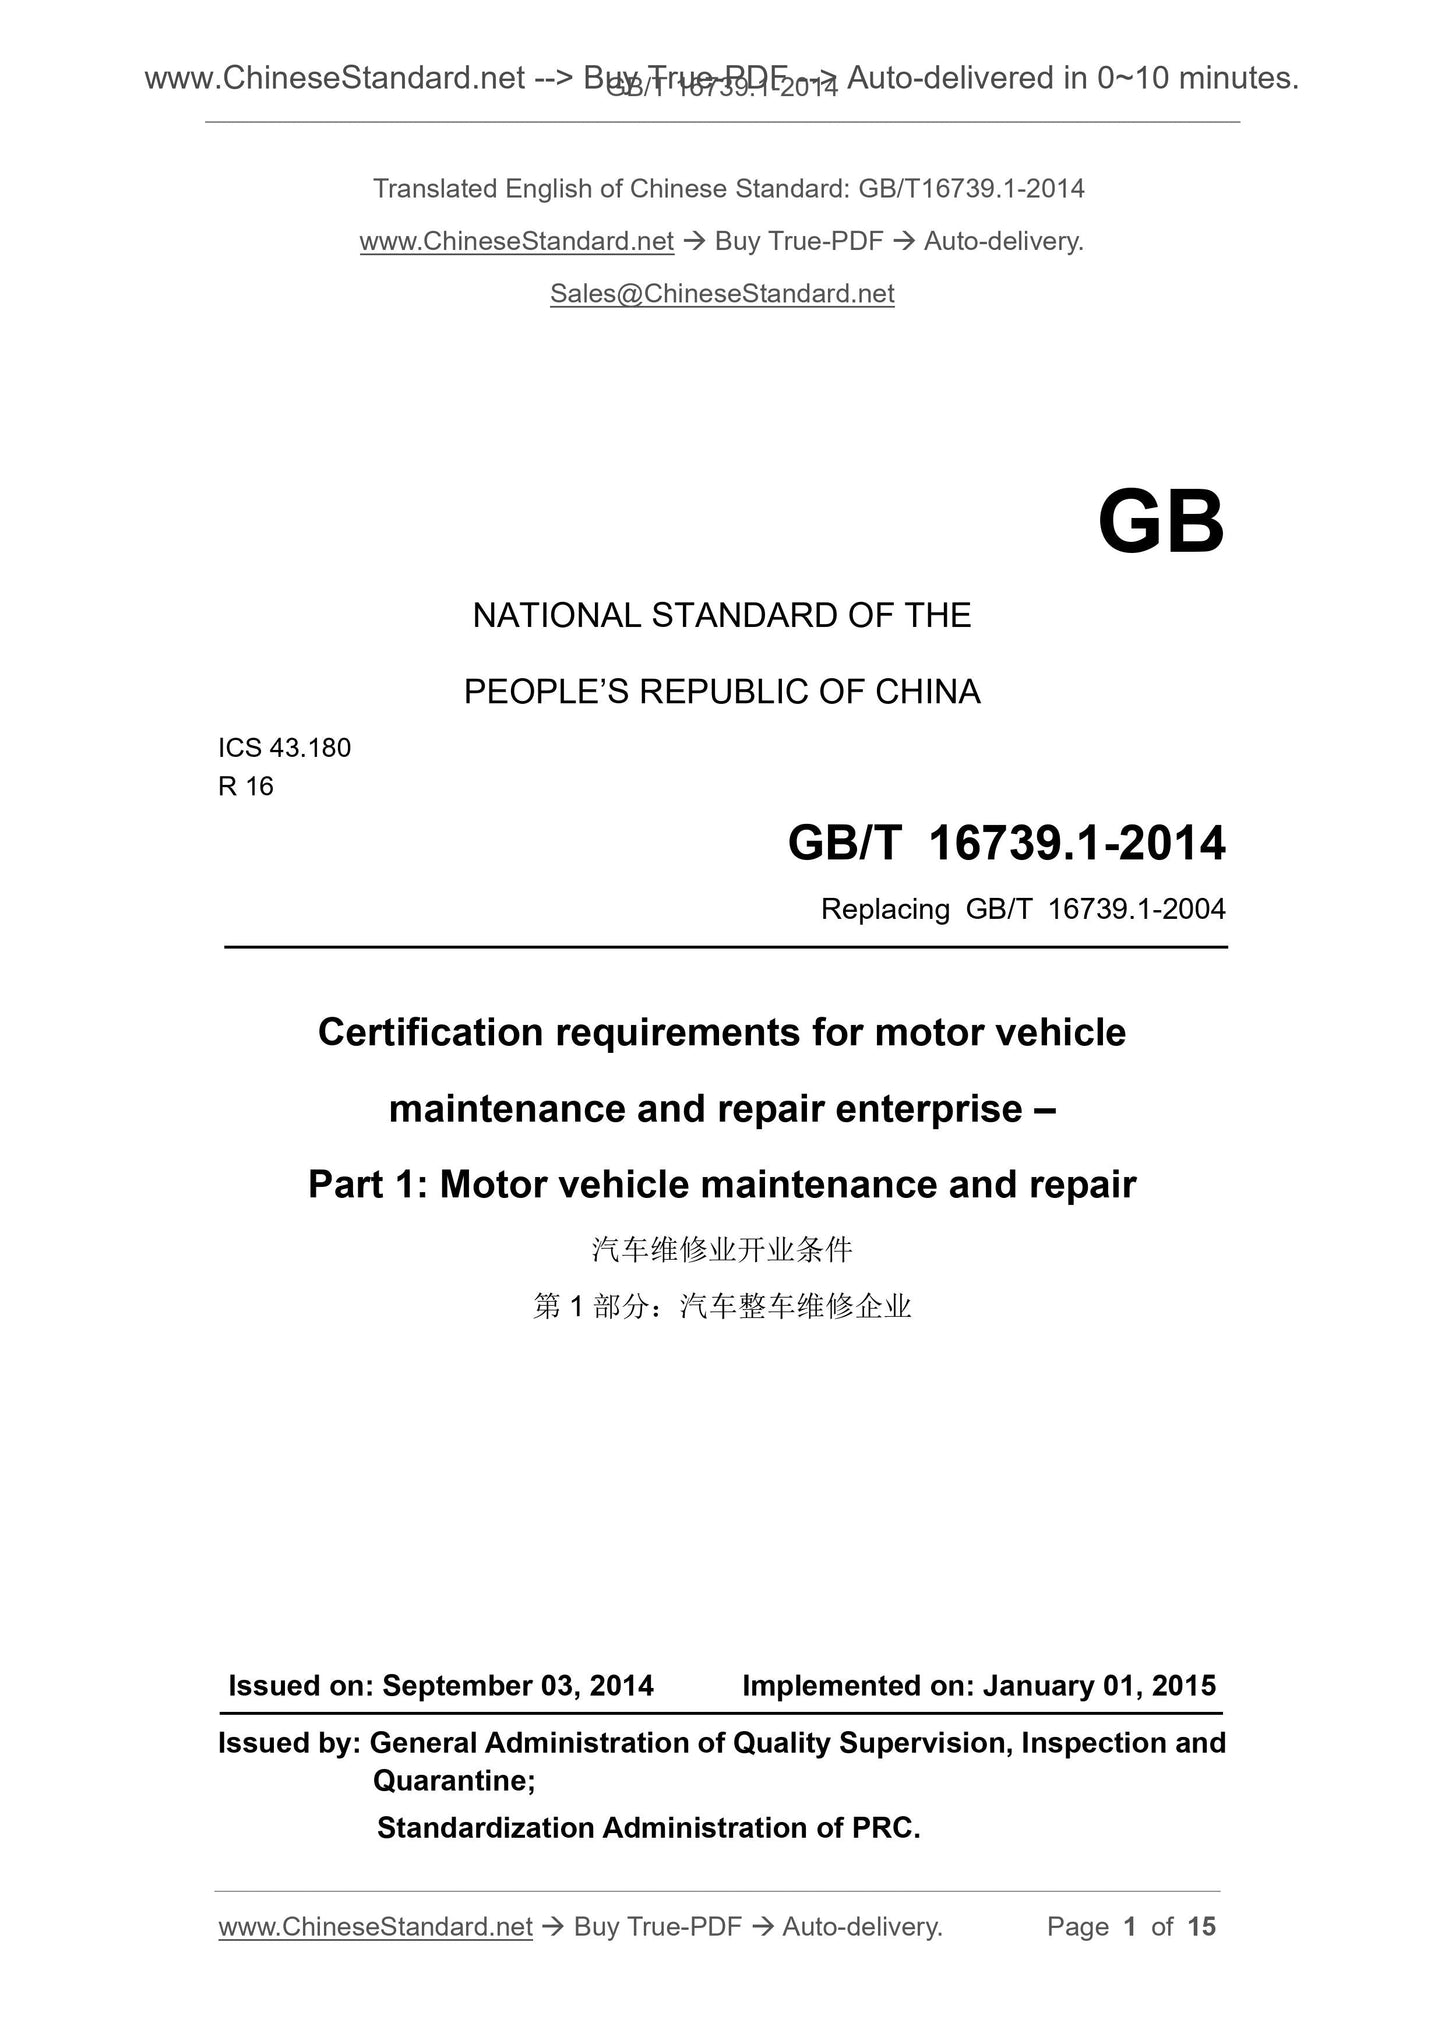 GB/T 16739.1-2014 Page 1